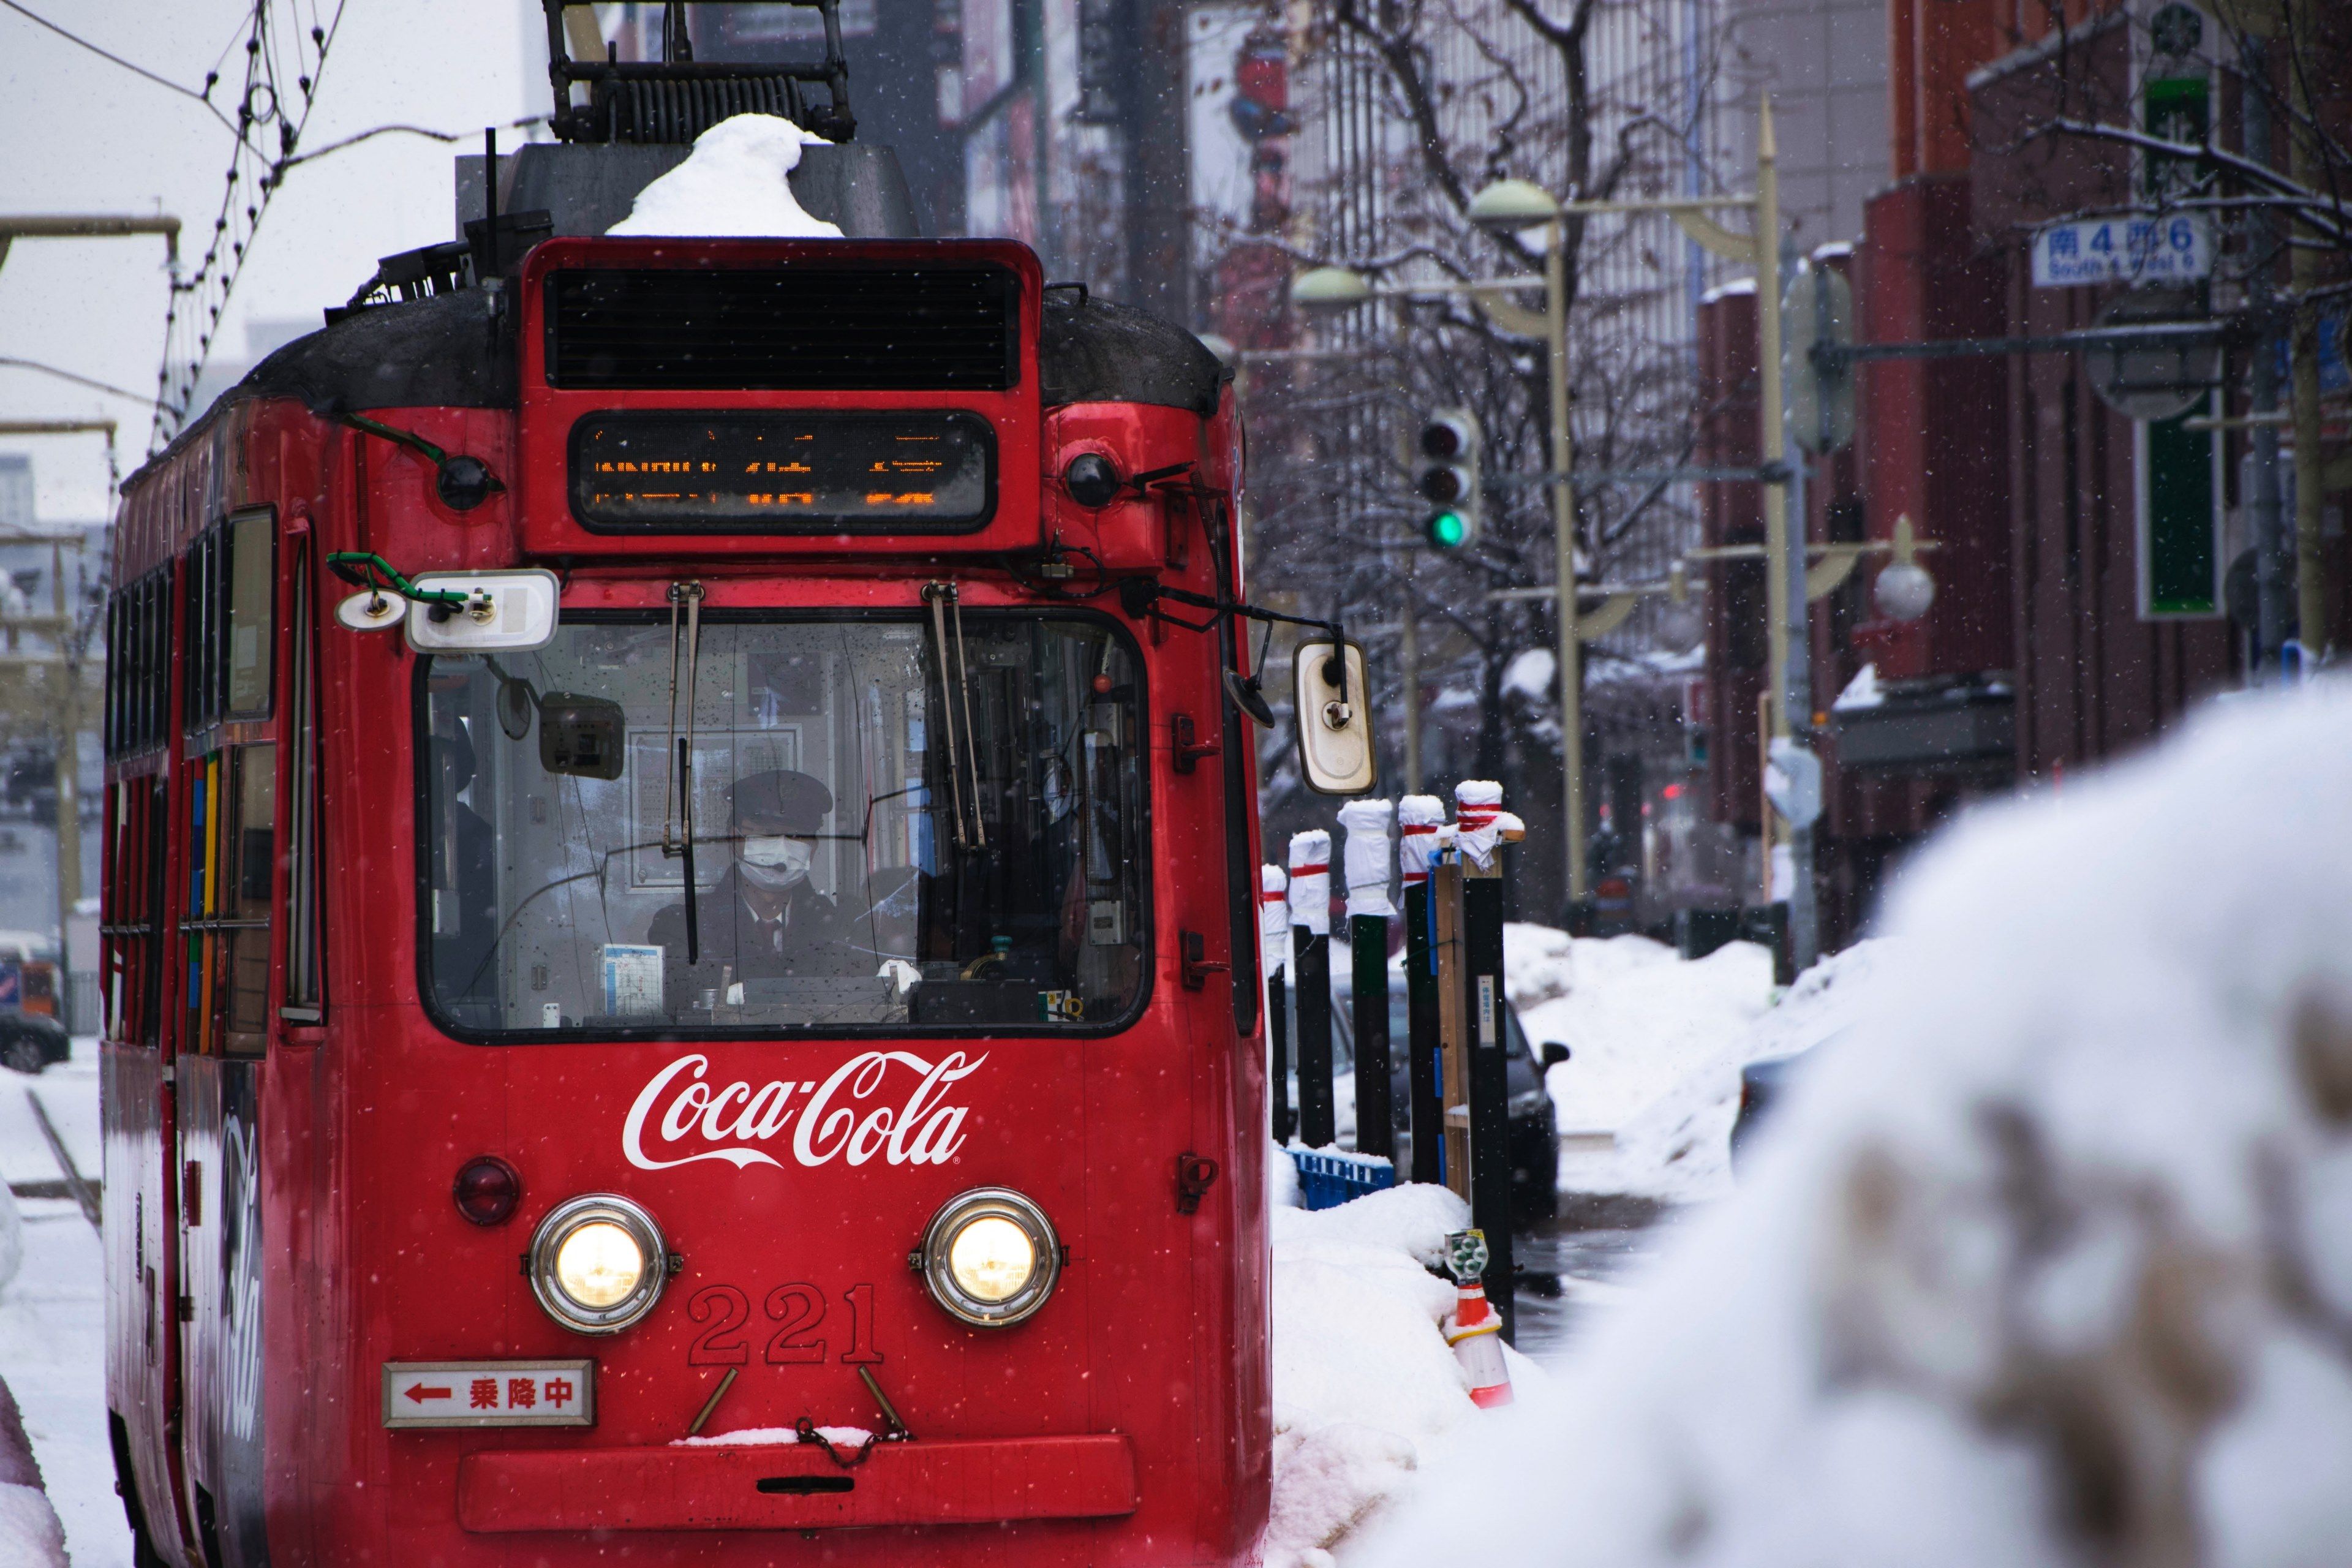 Wallpaper / a trolleybus in sapporo japan with coca cola branding on the front, coca cola trolleybus in japan 4k wallpaper